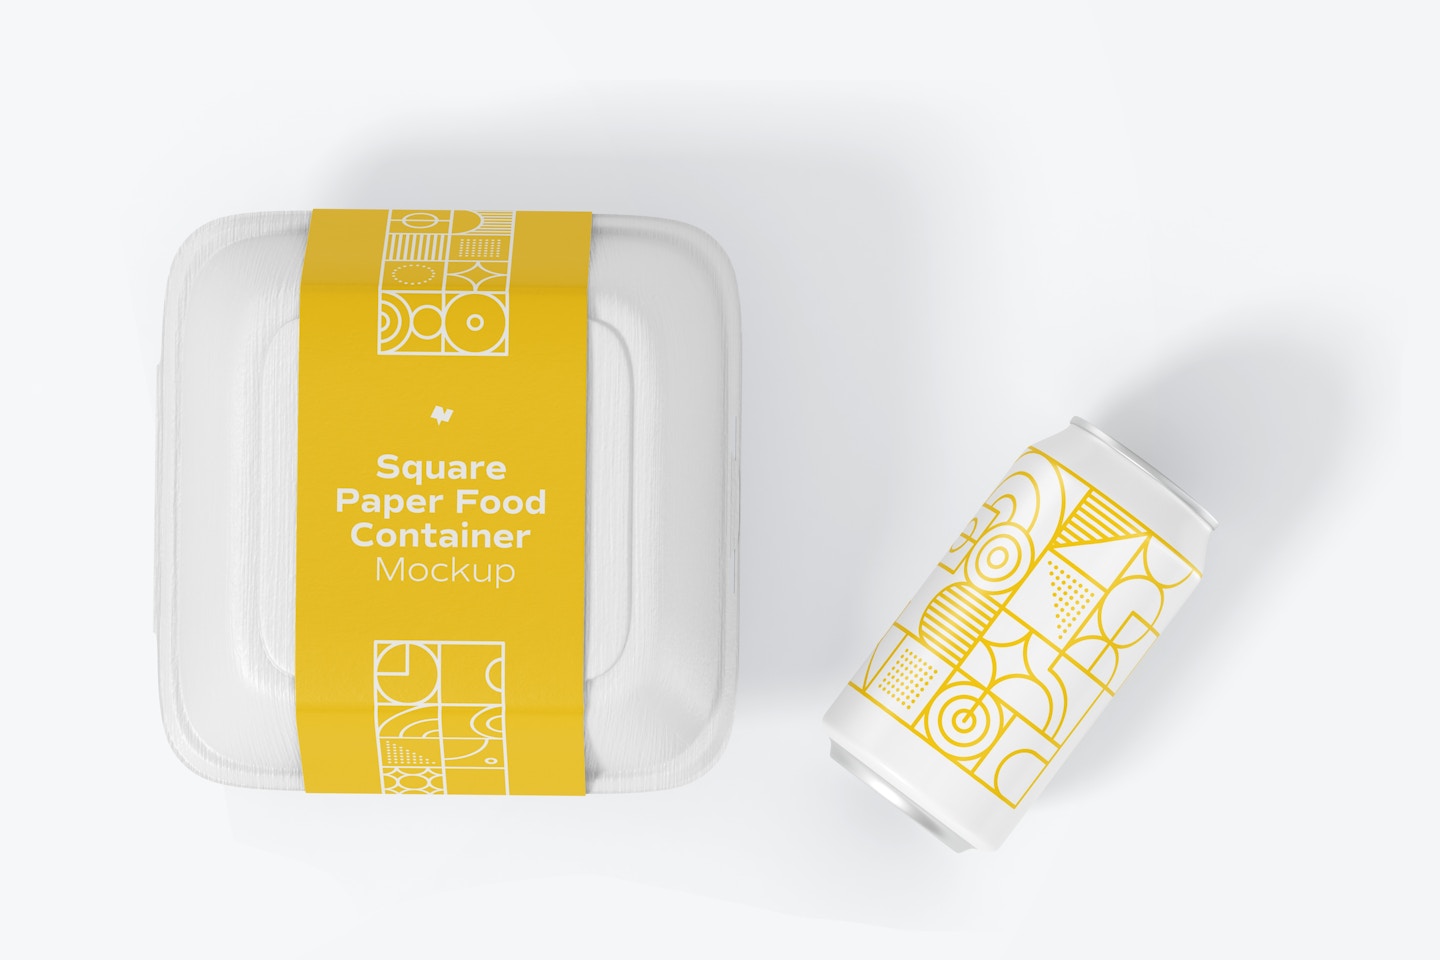 Square Paper Food Container Mockup with Can, Vertical